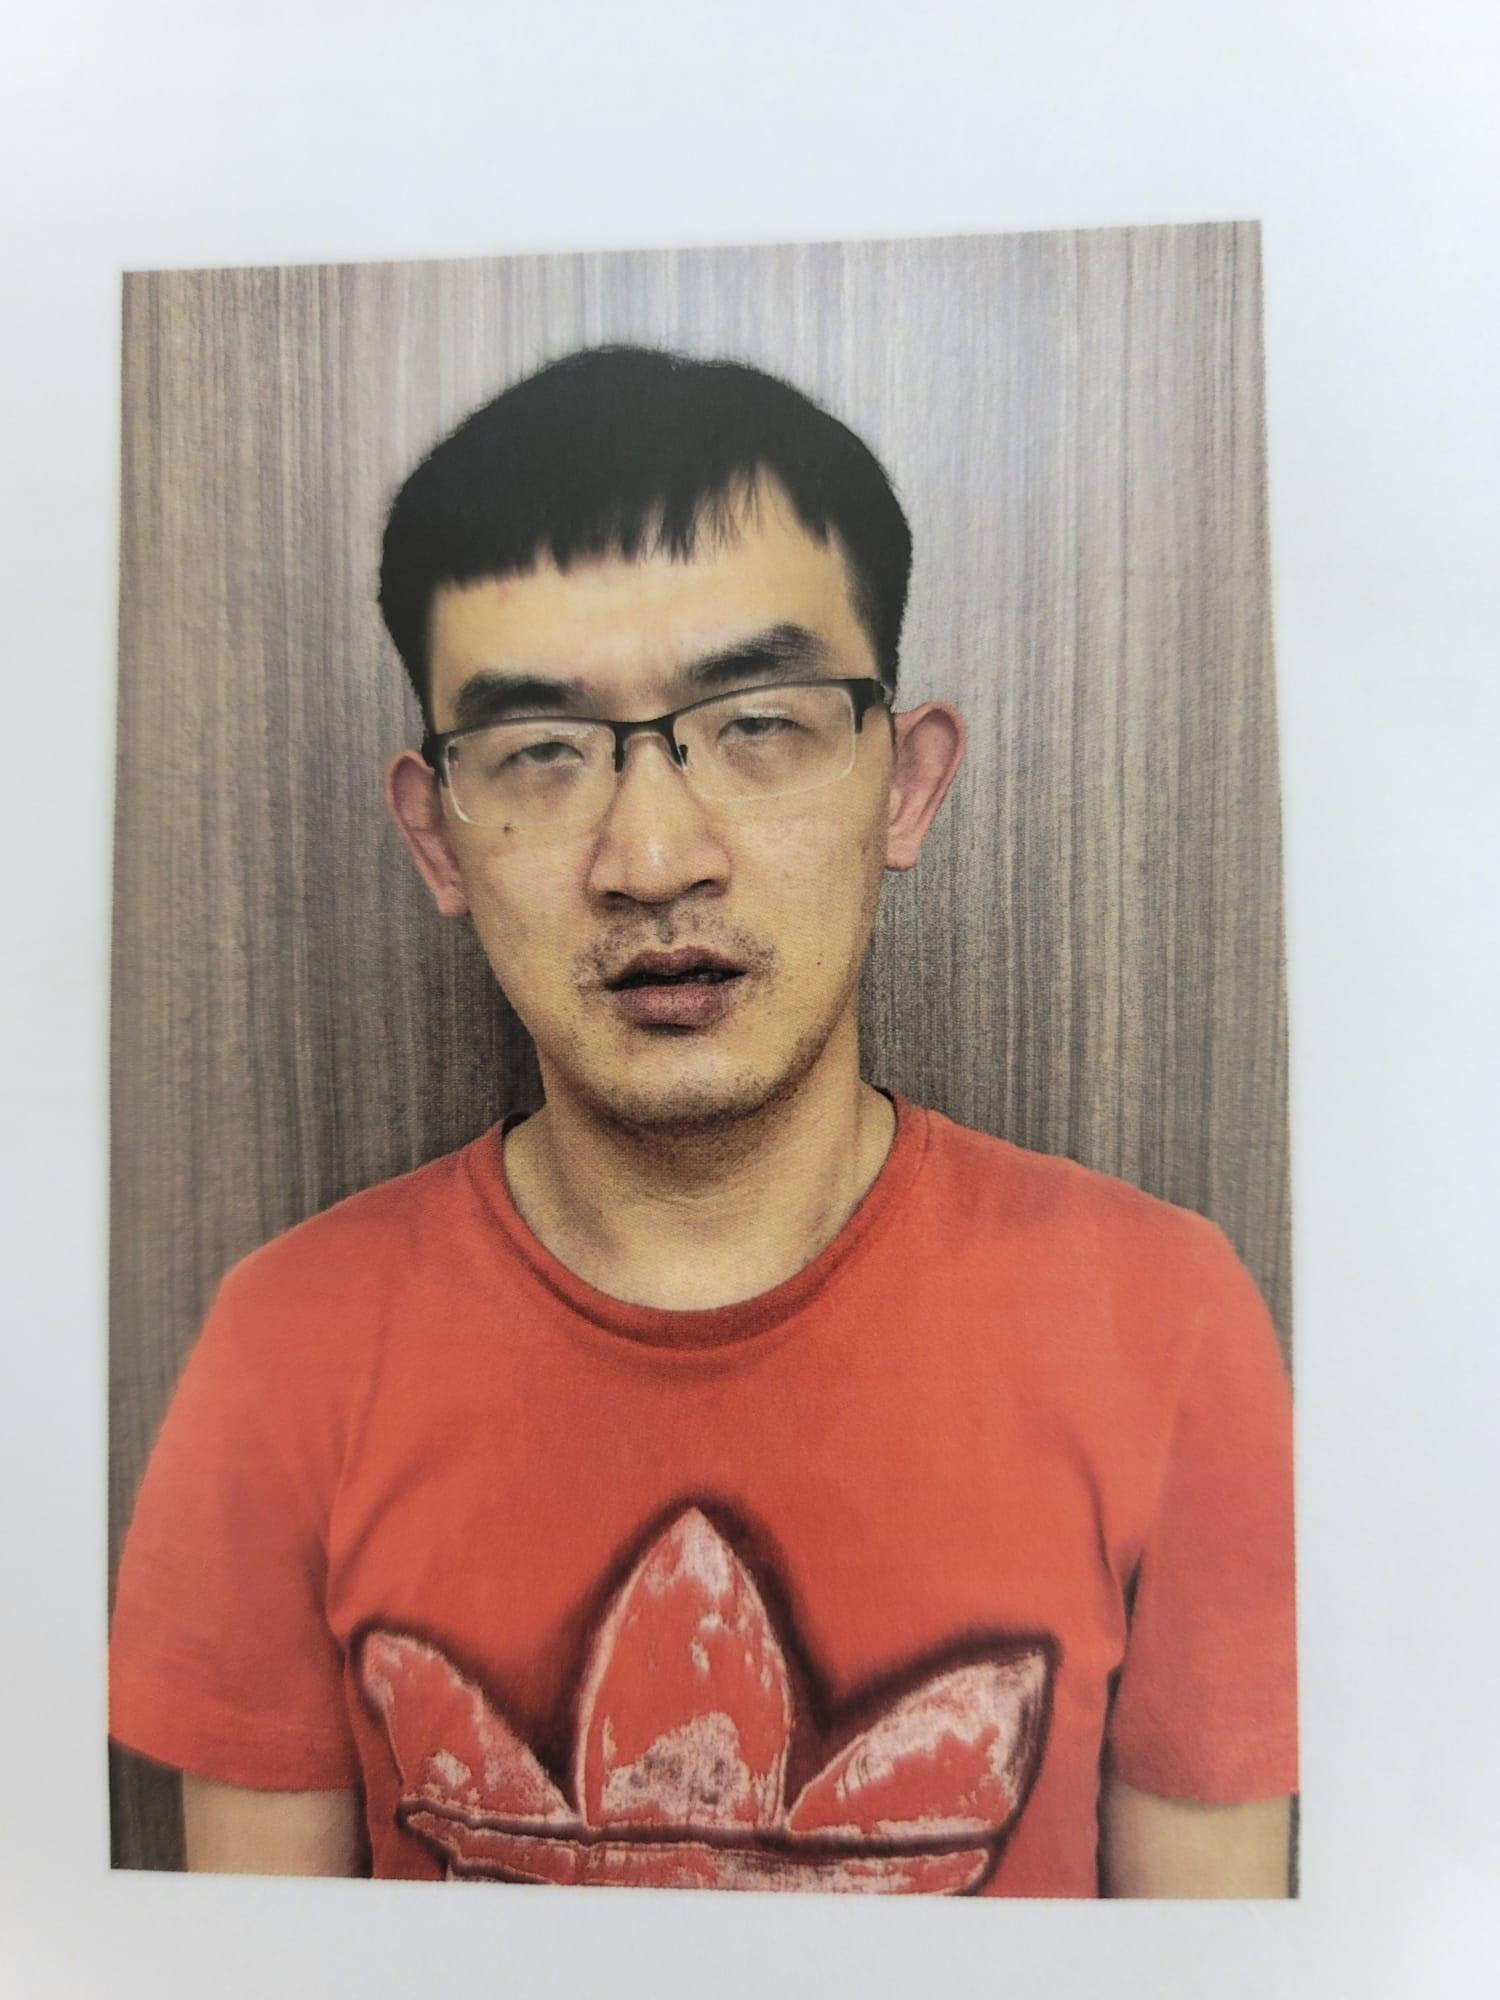 Tsang Man-tat, aged 35, is about 1.7 metres tall, 66 kilograms in weight and of thin build. He has a long face with yellow complexion and short black hair. He was last seen wearing a green short-sleeved T-shirt, black trousers and black sneakers.